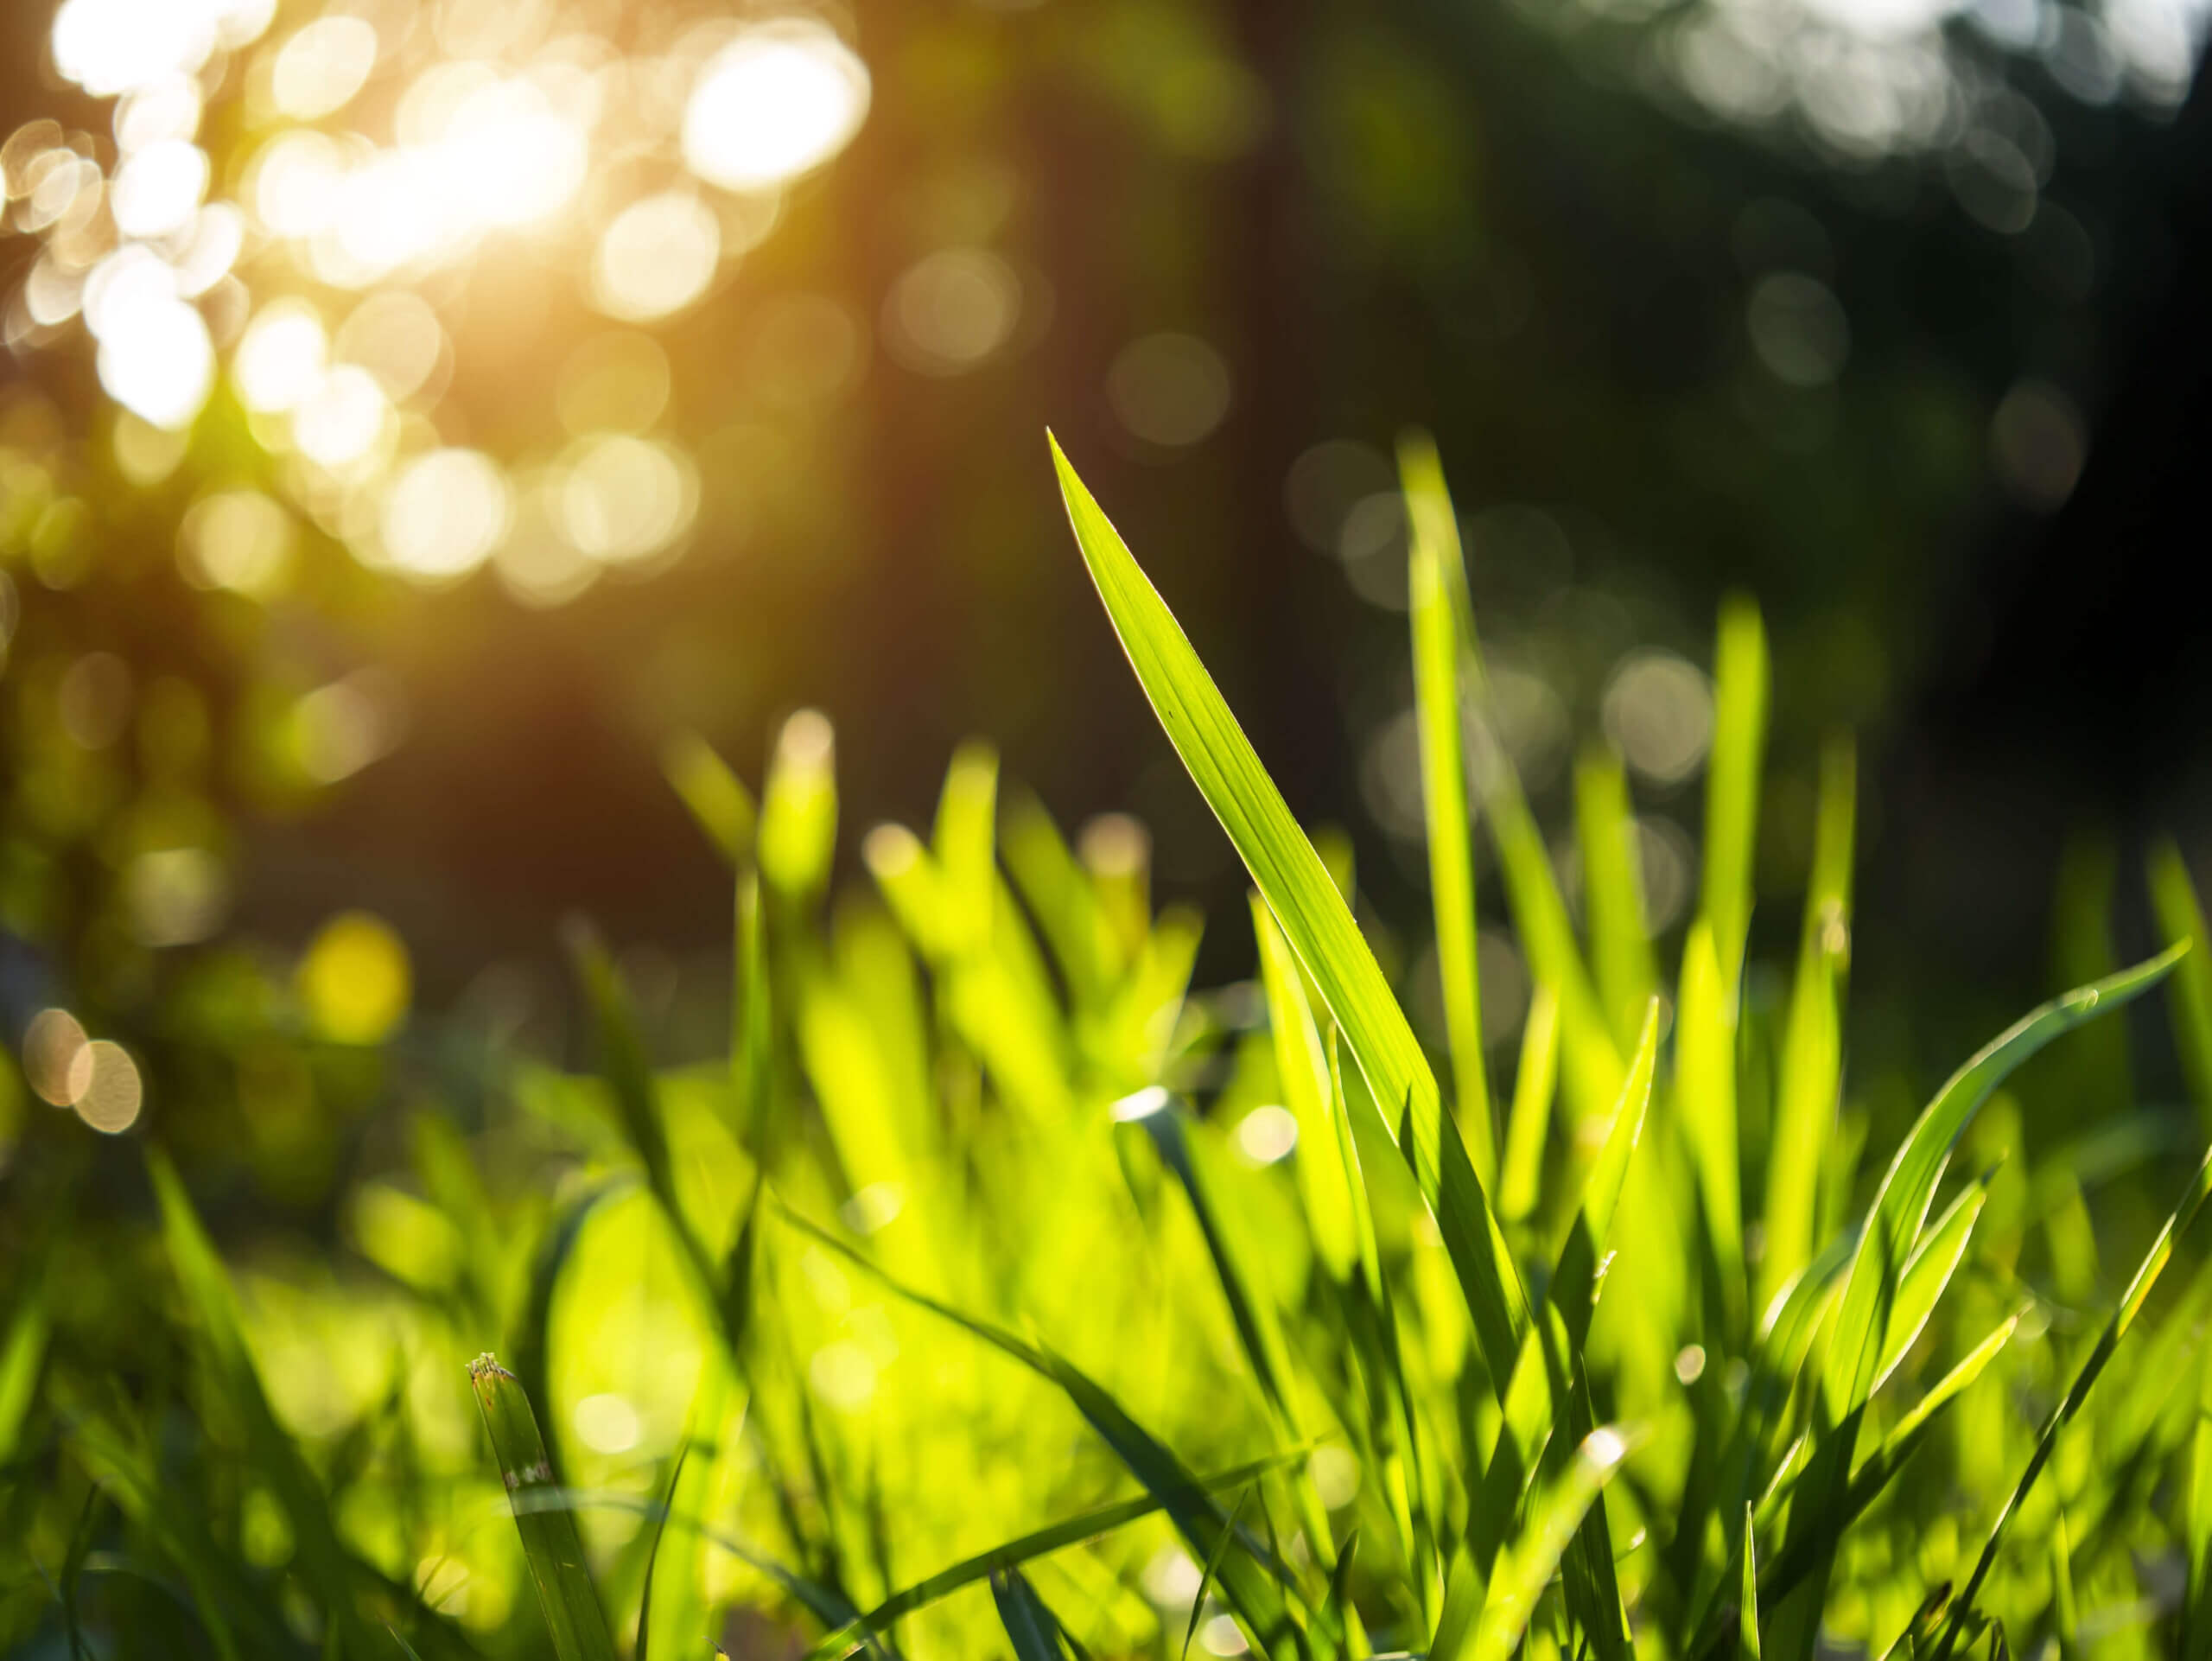 Grass regenerate in the garden with bokeh and sunlight on blur background.